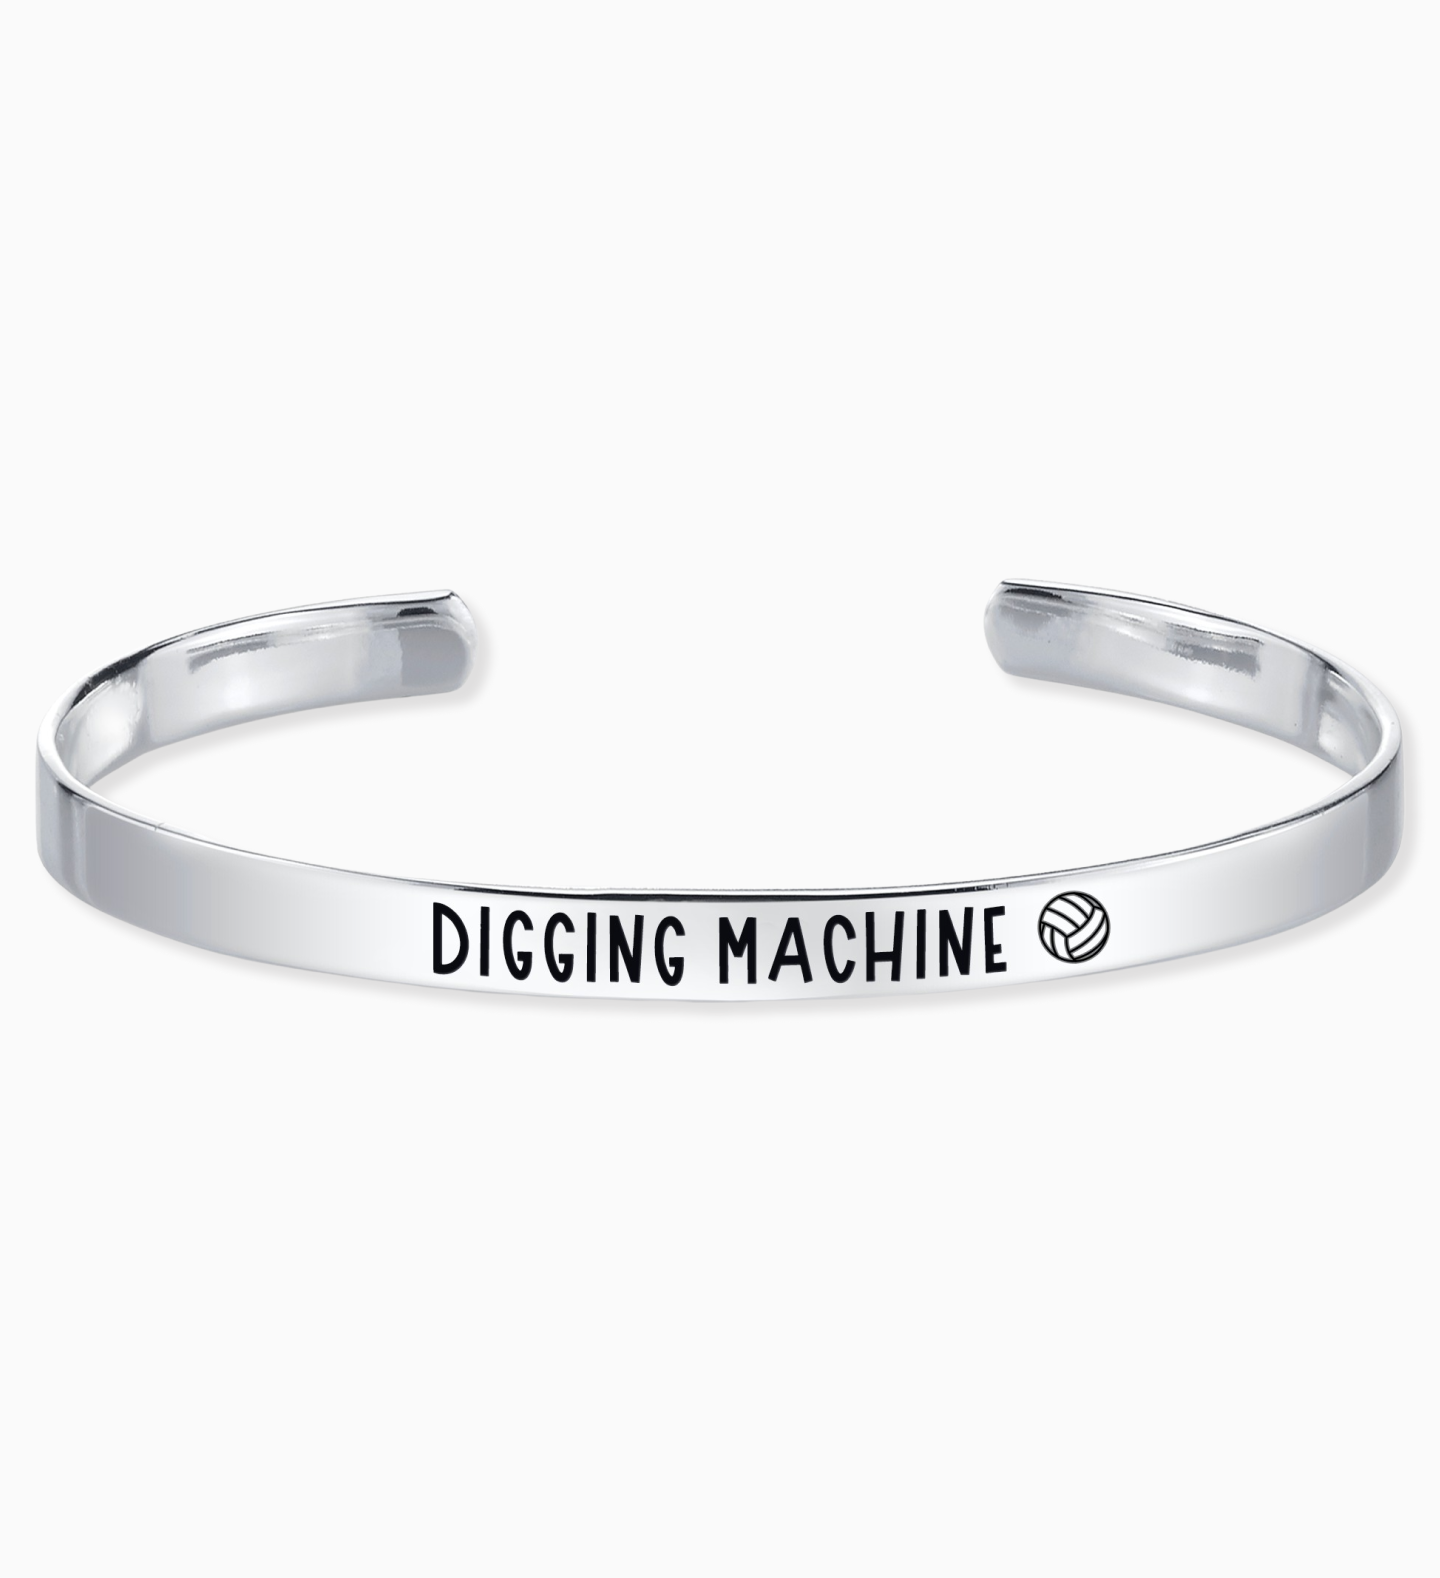 Digging Machine - Volleyball Position Engraved Bangle